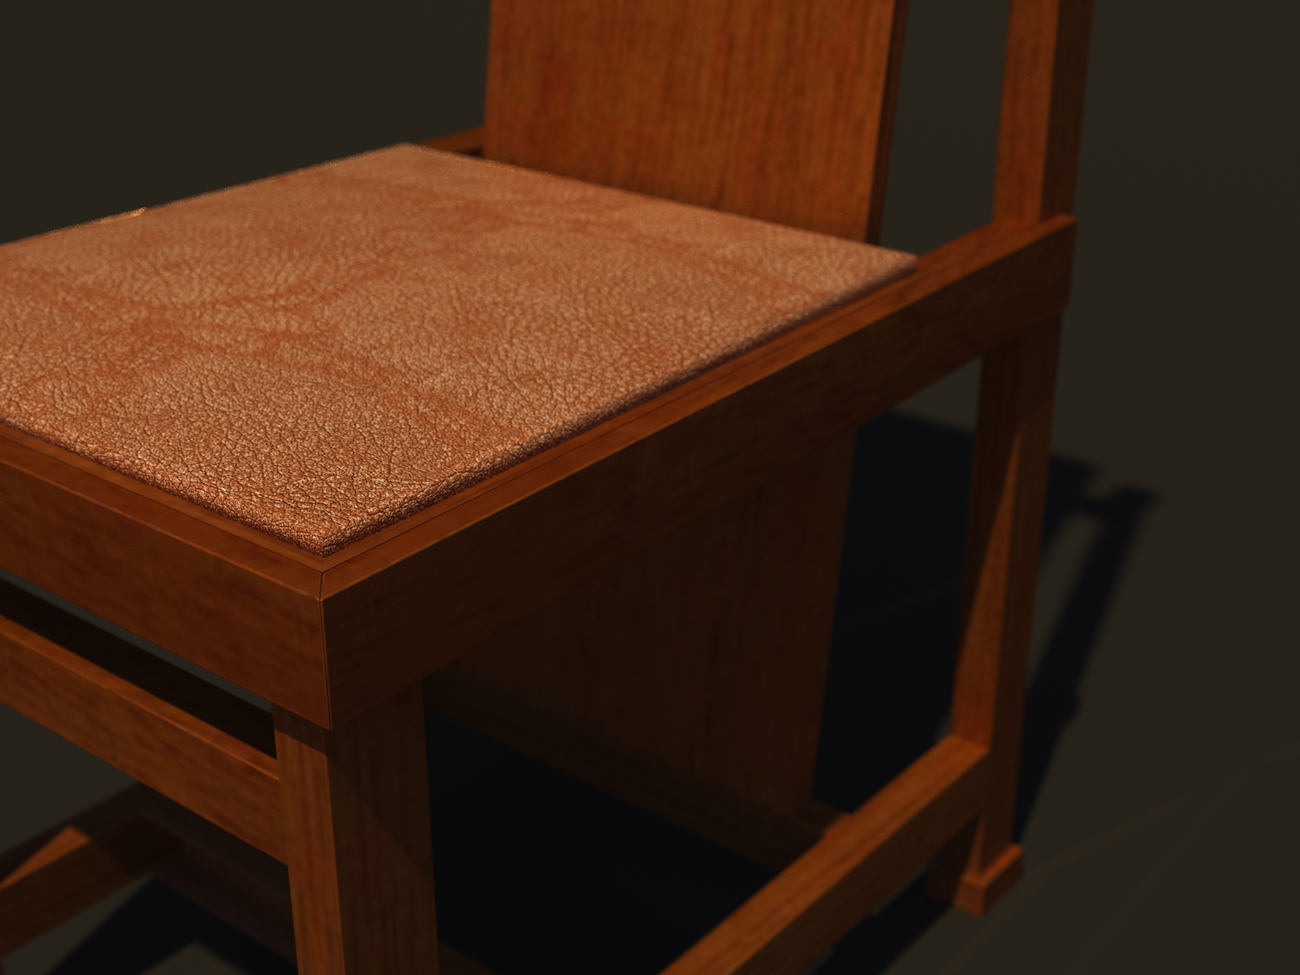 chair thea5hr23mincrf-sm.png